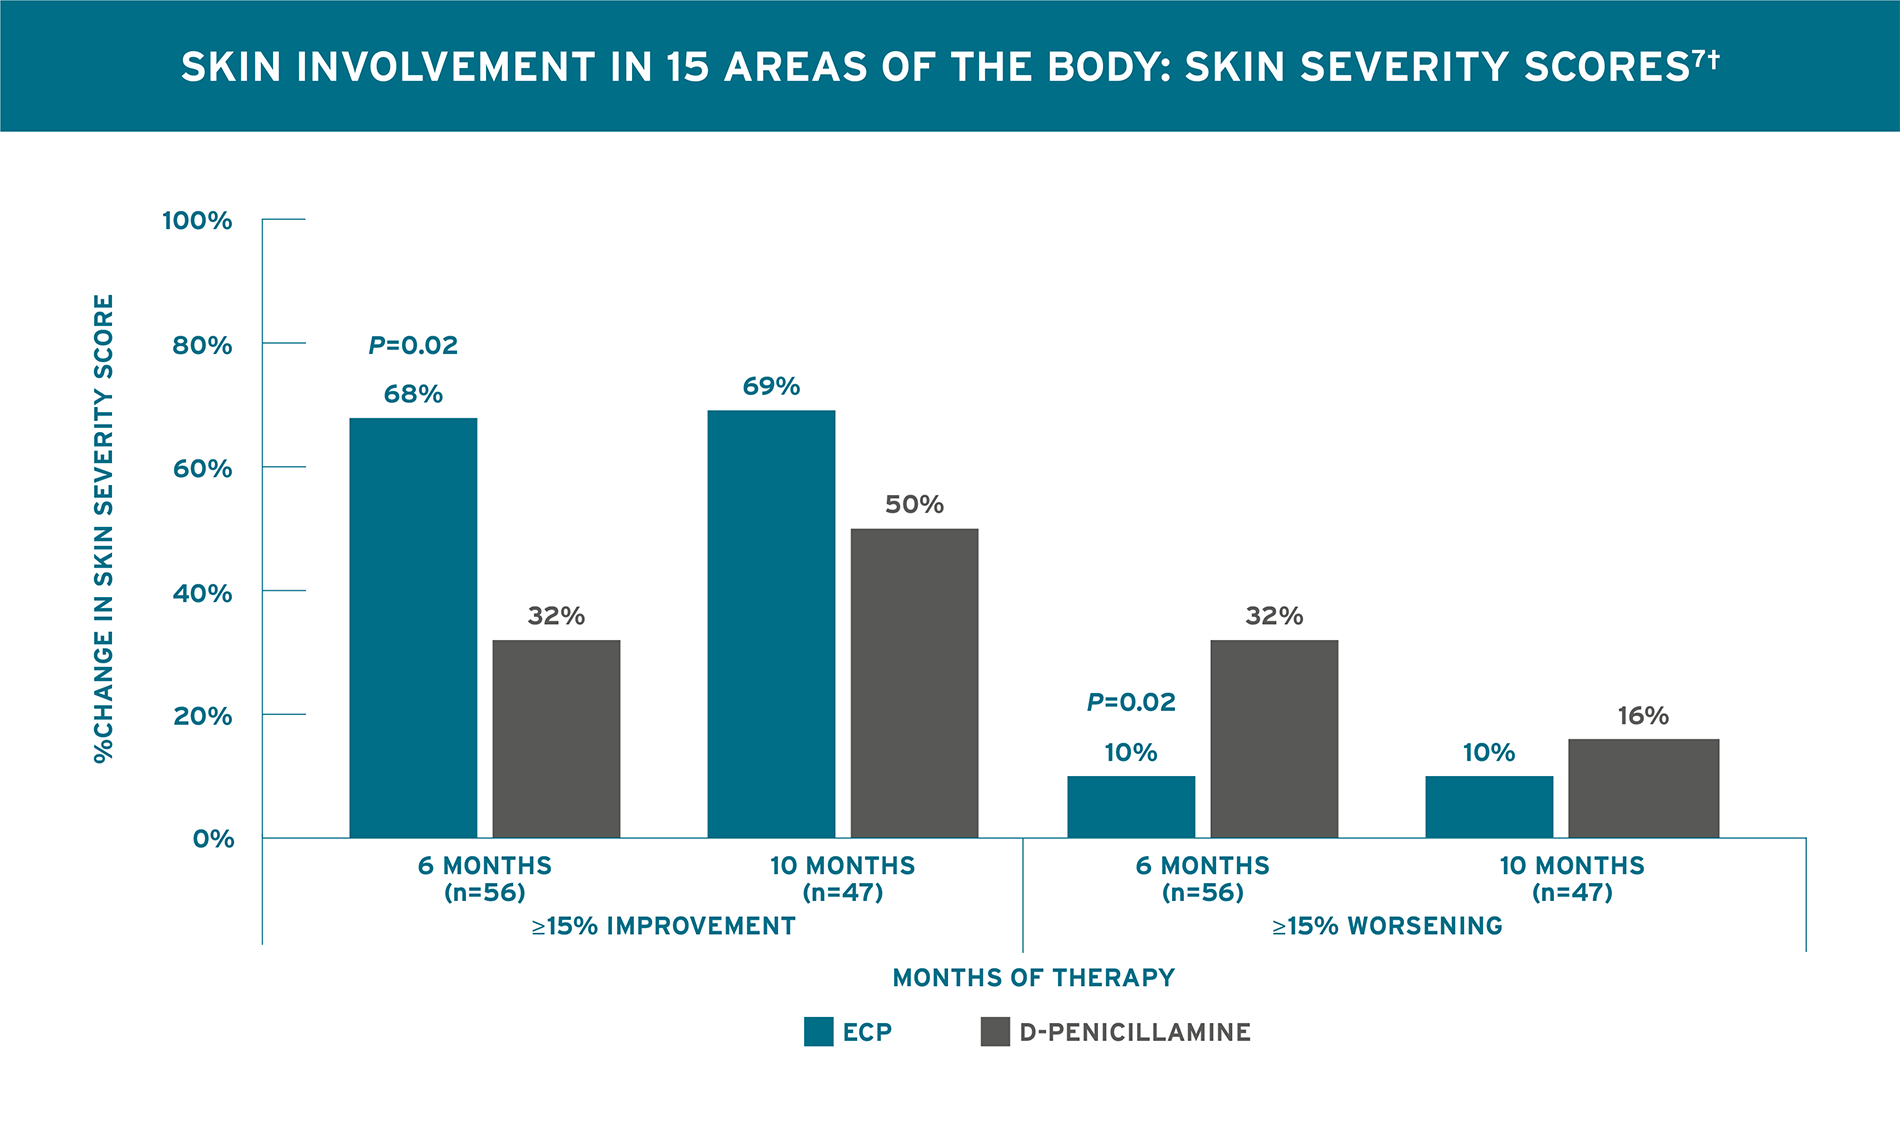 Skin Involvement in 15 areas of the body